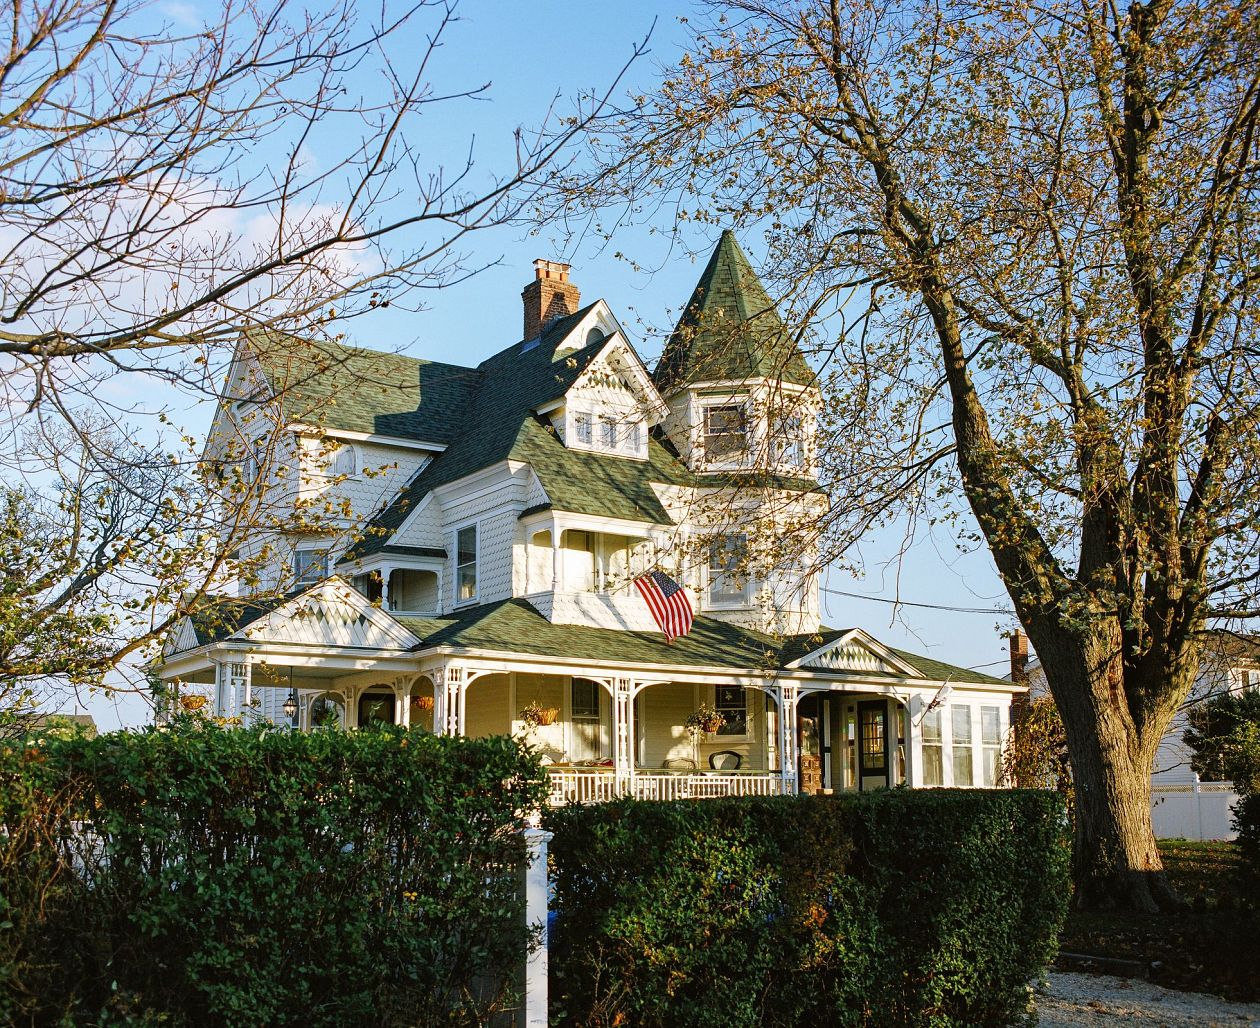 THE house in Amityville, New York , USA